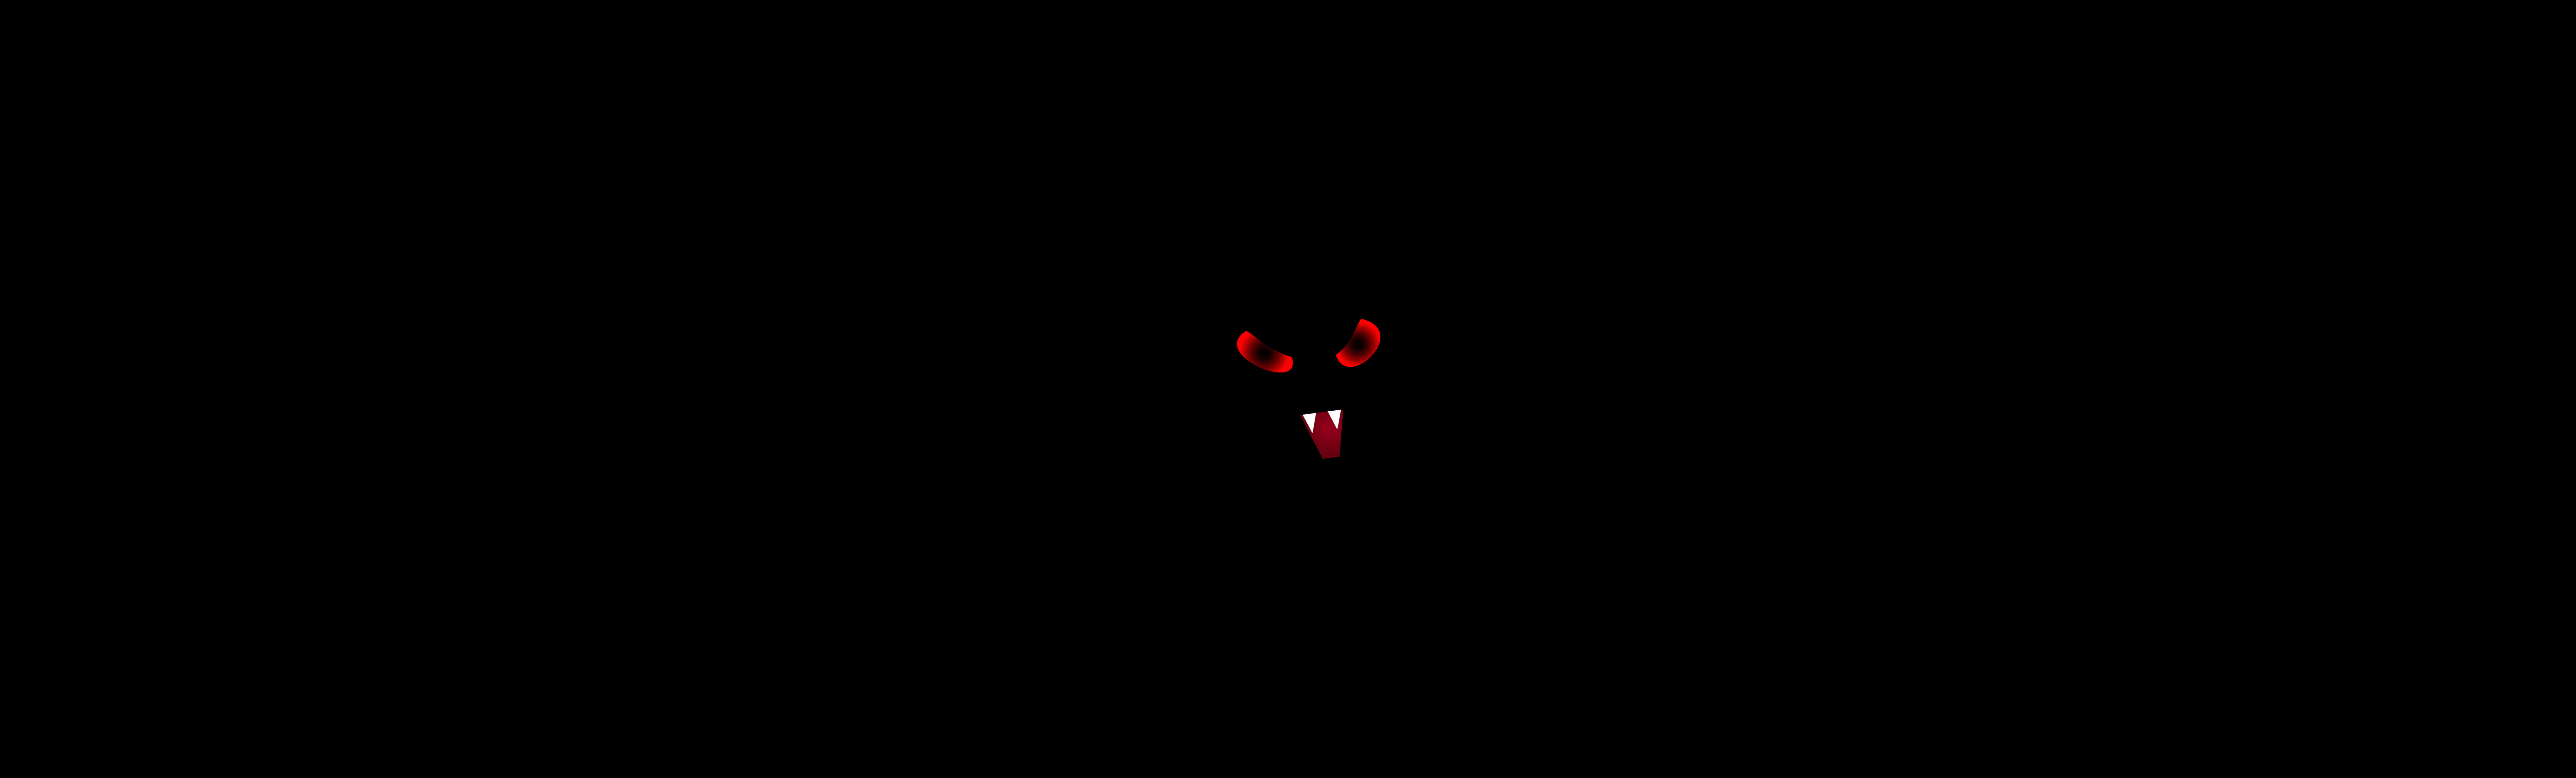 A Face With Red Eyes And Teeth With Marfa Lights In The Background